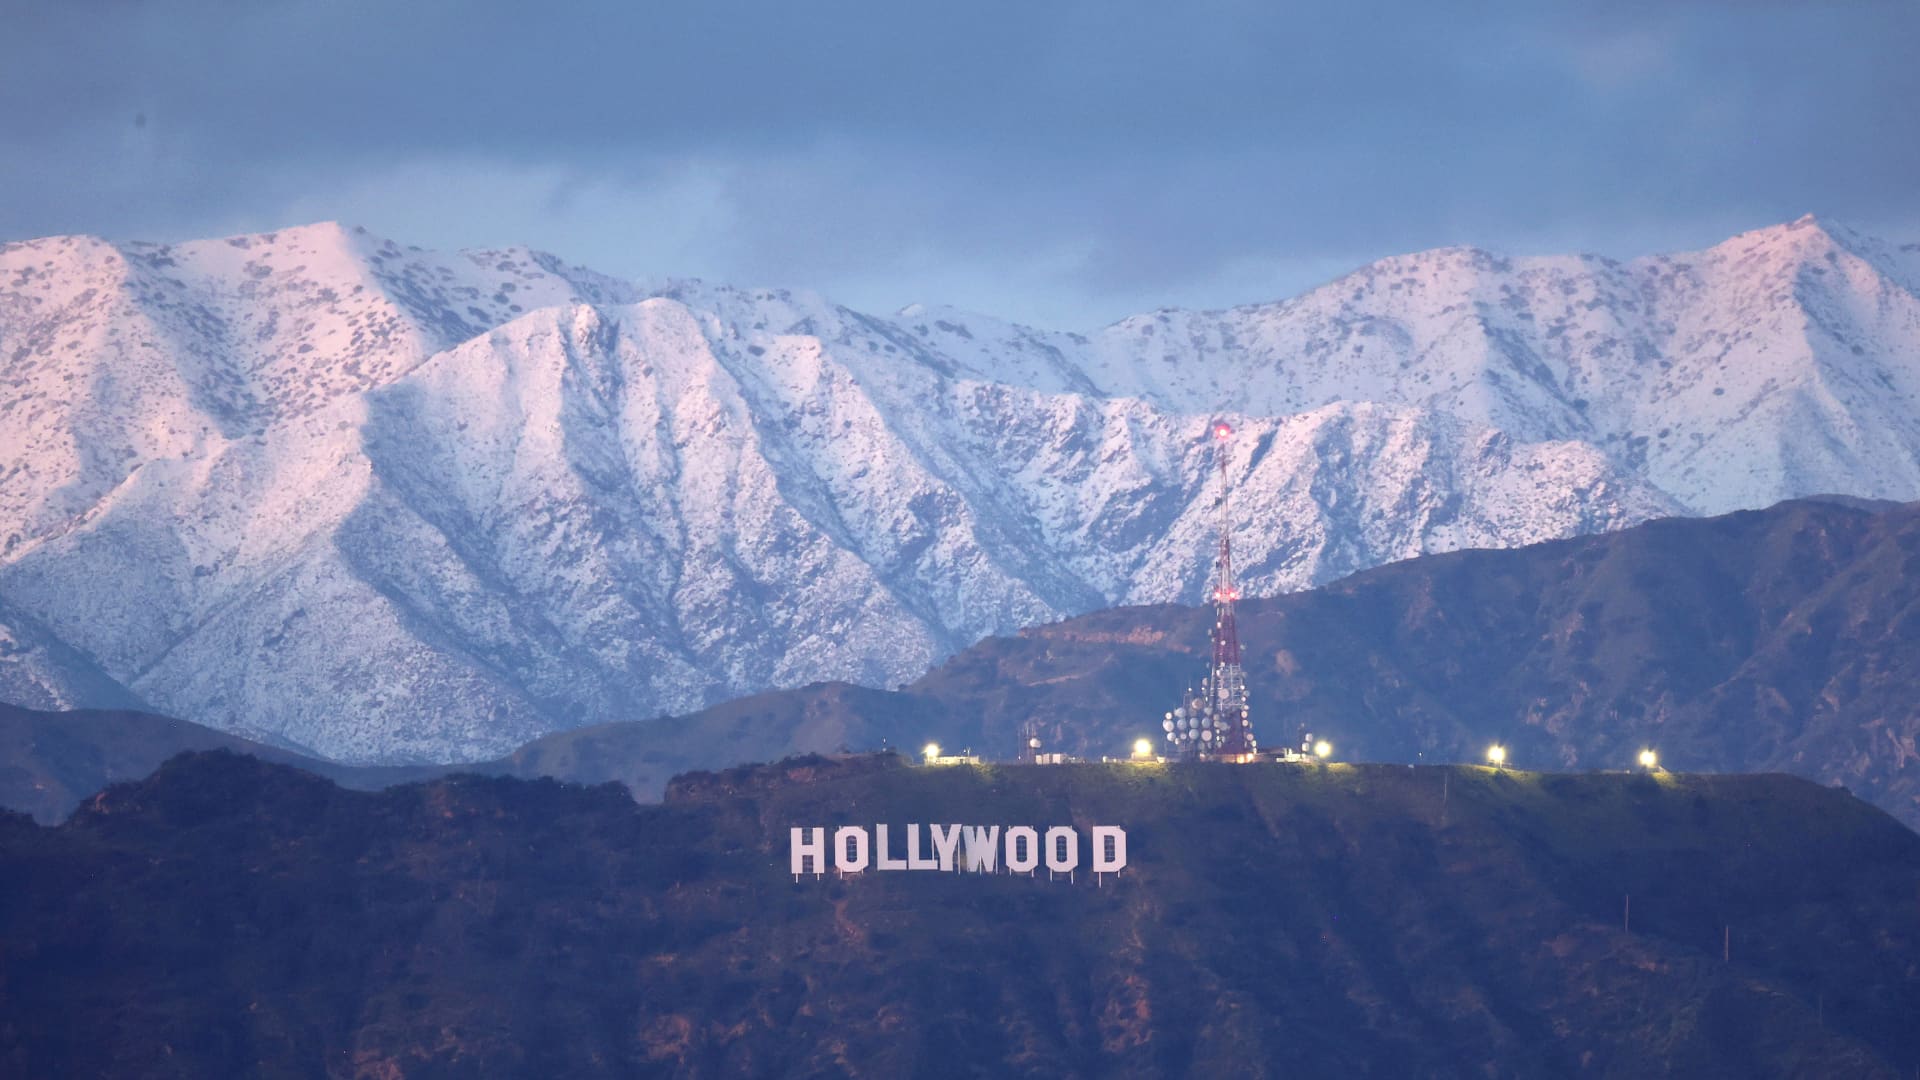 The Hollywood sign stands in front of snow-covered mountains after another winter storm hit Southern California on March 01, 2023 in Los Angeles, California.